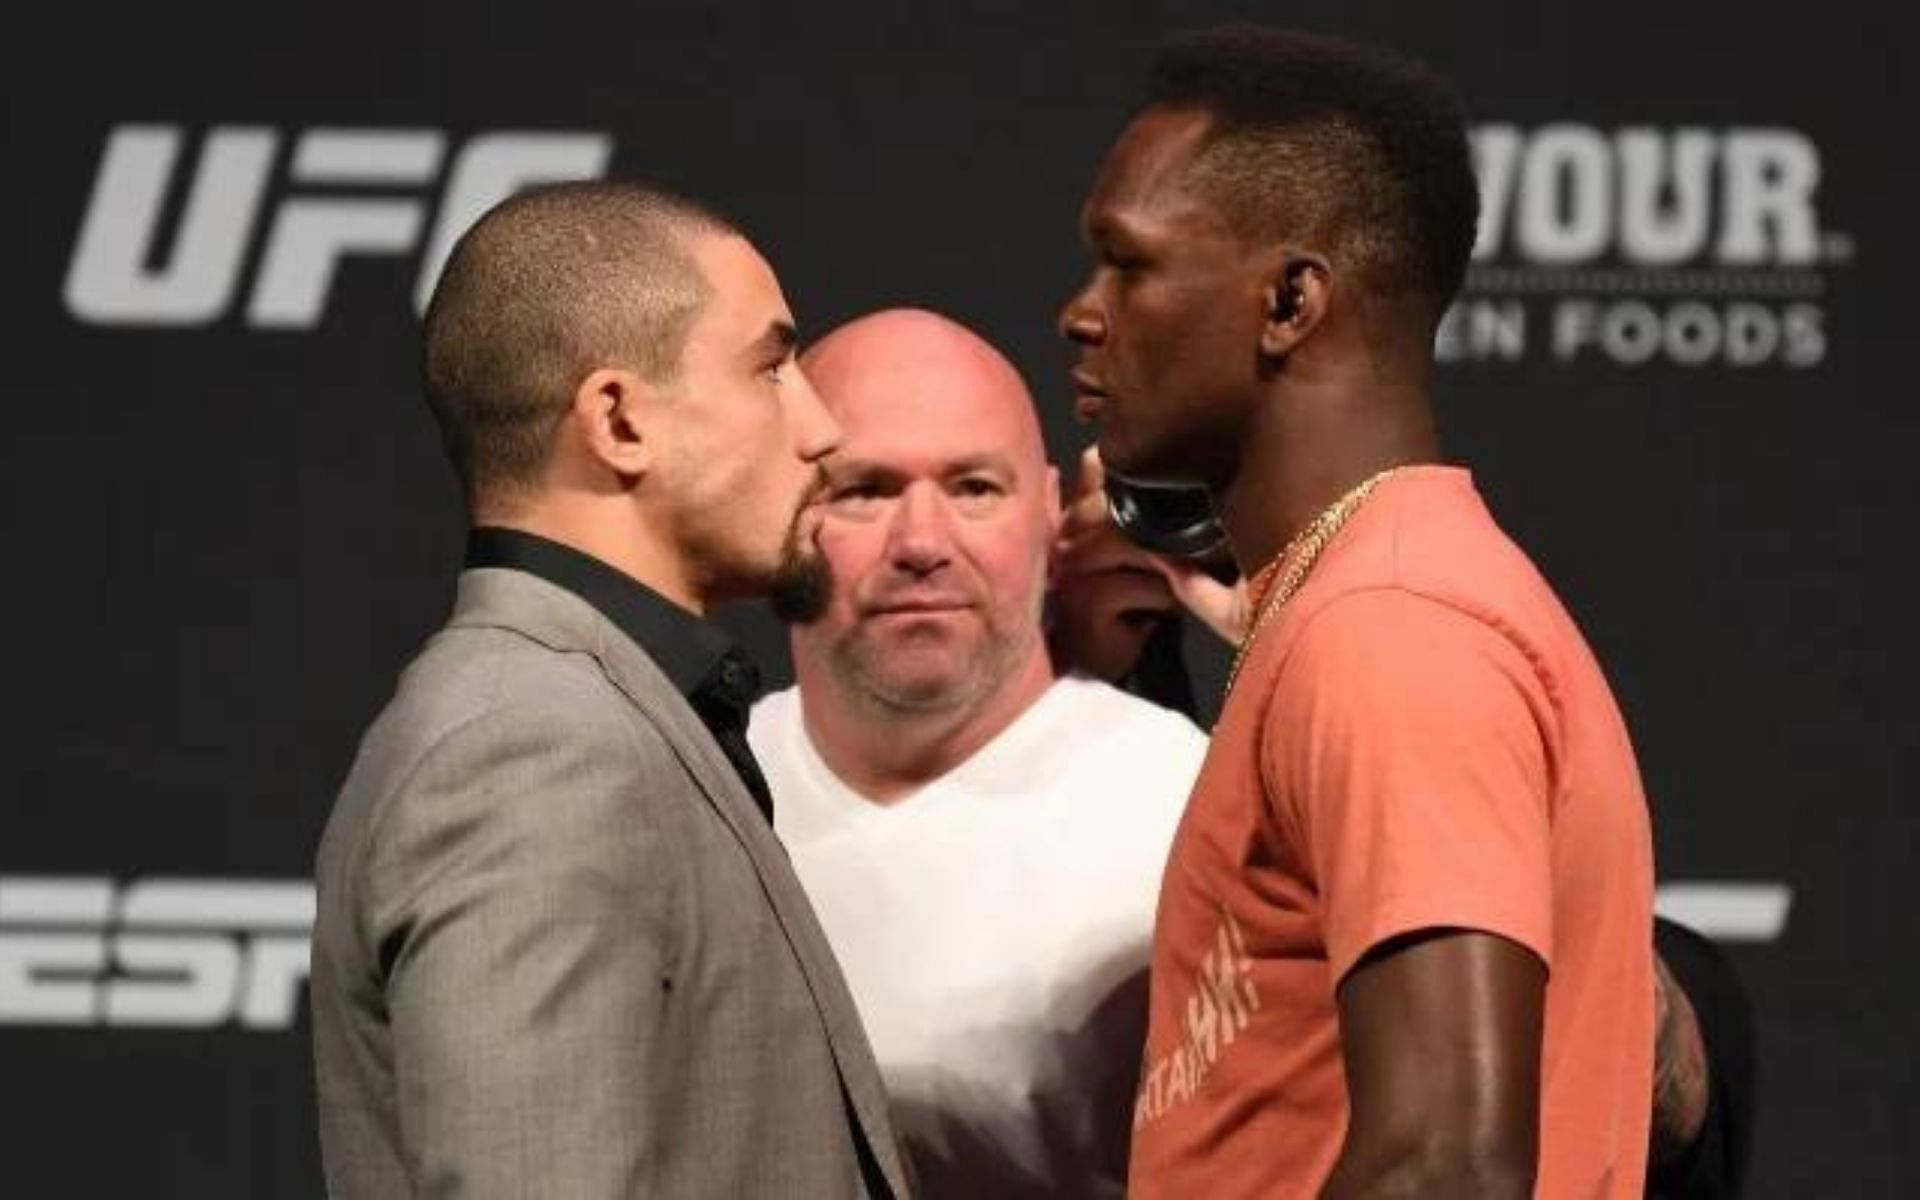 Robert Whittaker and Israel Adesanya face off before their first fight at UFC 243